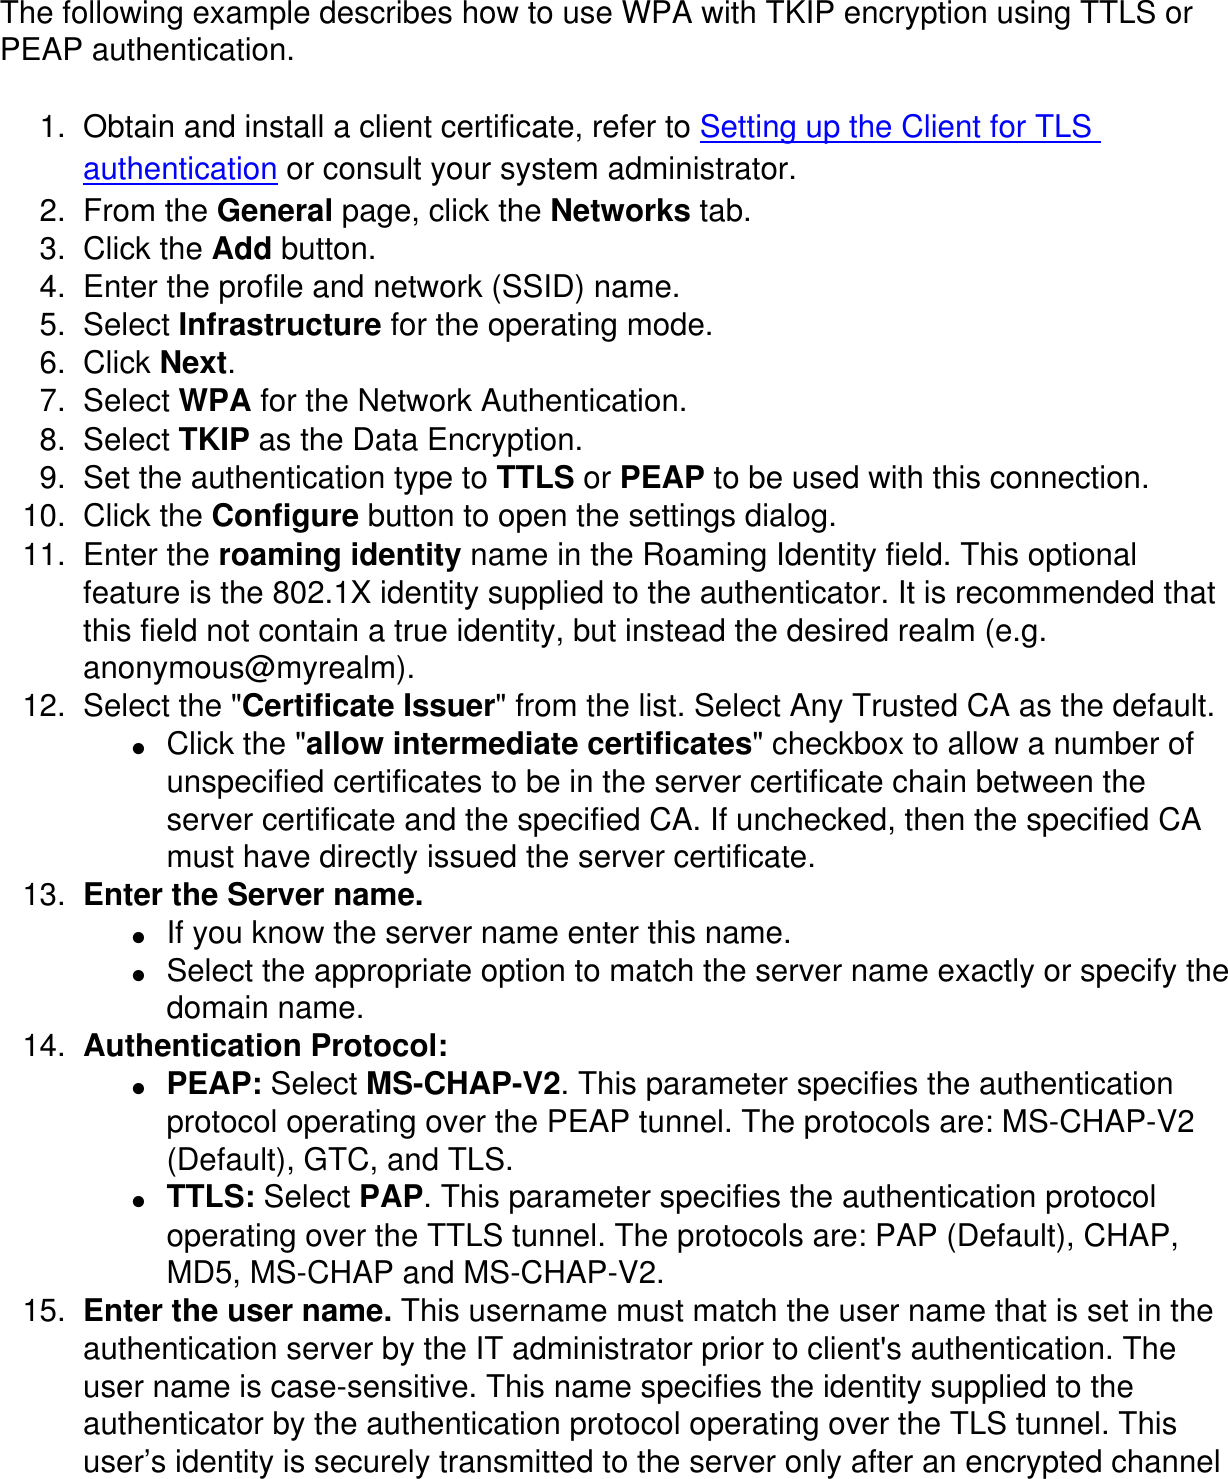 The following example describes how to use WPA with TKIP encryption using TTLS or PEAP authentication. 1.  Obtain and install a client certificate, refer to Setting up the Client for TLS authentication or consult your system administrator. 2.  From the General page, click the Networks tab. 3.  Click the Add button. 4.  Enter the profile and network (SSID) name. 5.  Select Infrastructure for the operating mode. 6.  Click Next. 7.  Select WPA for the Network Authentication. 8.  Select TKIP as the Data Encryption. 9.  Set the authentication type to TTLS or PEAP to be used with this connection. 10.  Click the Configure button to open the settings dialog. 11.  Enter the roaming identity name in the Roaming Identity field. This optional feature is the 802.1X identity supplied to the authenticator. It is recommended that this field not contain a true identity, but instead the desired realm (e.g. anonymous@myrealm). 12.  Select the &quot;Certificate Issuer&quot; from the list. Select Any Trusted CA as the default. ●     Click the &quot;allow intermediate certificates&quot; checkbox to allow a number of unspecified certificates to be in the server certificate chain between the server certificate and the specified CA. If unchecked, then the specified CA must have directly issued the server certificate. 13.  Enter the Server name. ●     If you know the server name enter this name. ●     Select the appropriate option to match the server name exactly or specify the domain name. 14.  Authentication Protocol: ●     PEAP: Select MS-CHAP-V2. This parameter specifies the authentication protocol operating over the PEAP tunnel. The protocols are: MS-CHAP-V2 (Default), GTC, and TLS. ●     TTLS: Select PAP. This parameter specifies the authentication protocol operating over the TTLS tunnel. The protocols are: PAP (Default), CHAP, MD5, MS-CHAP and MS-CHAP-V2.15.  Enter the user name. This username must match the user name that is set in the authentication server by the IT administrator prior to client&apos;s authentication. The user name is case-sensitive. This name specifies the identity supplied to the authenticator by the authentication protocol operating over the TLS tunnel. This user’s identity is securely transmitted to the server only after an encrypted channel 